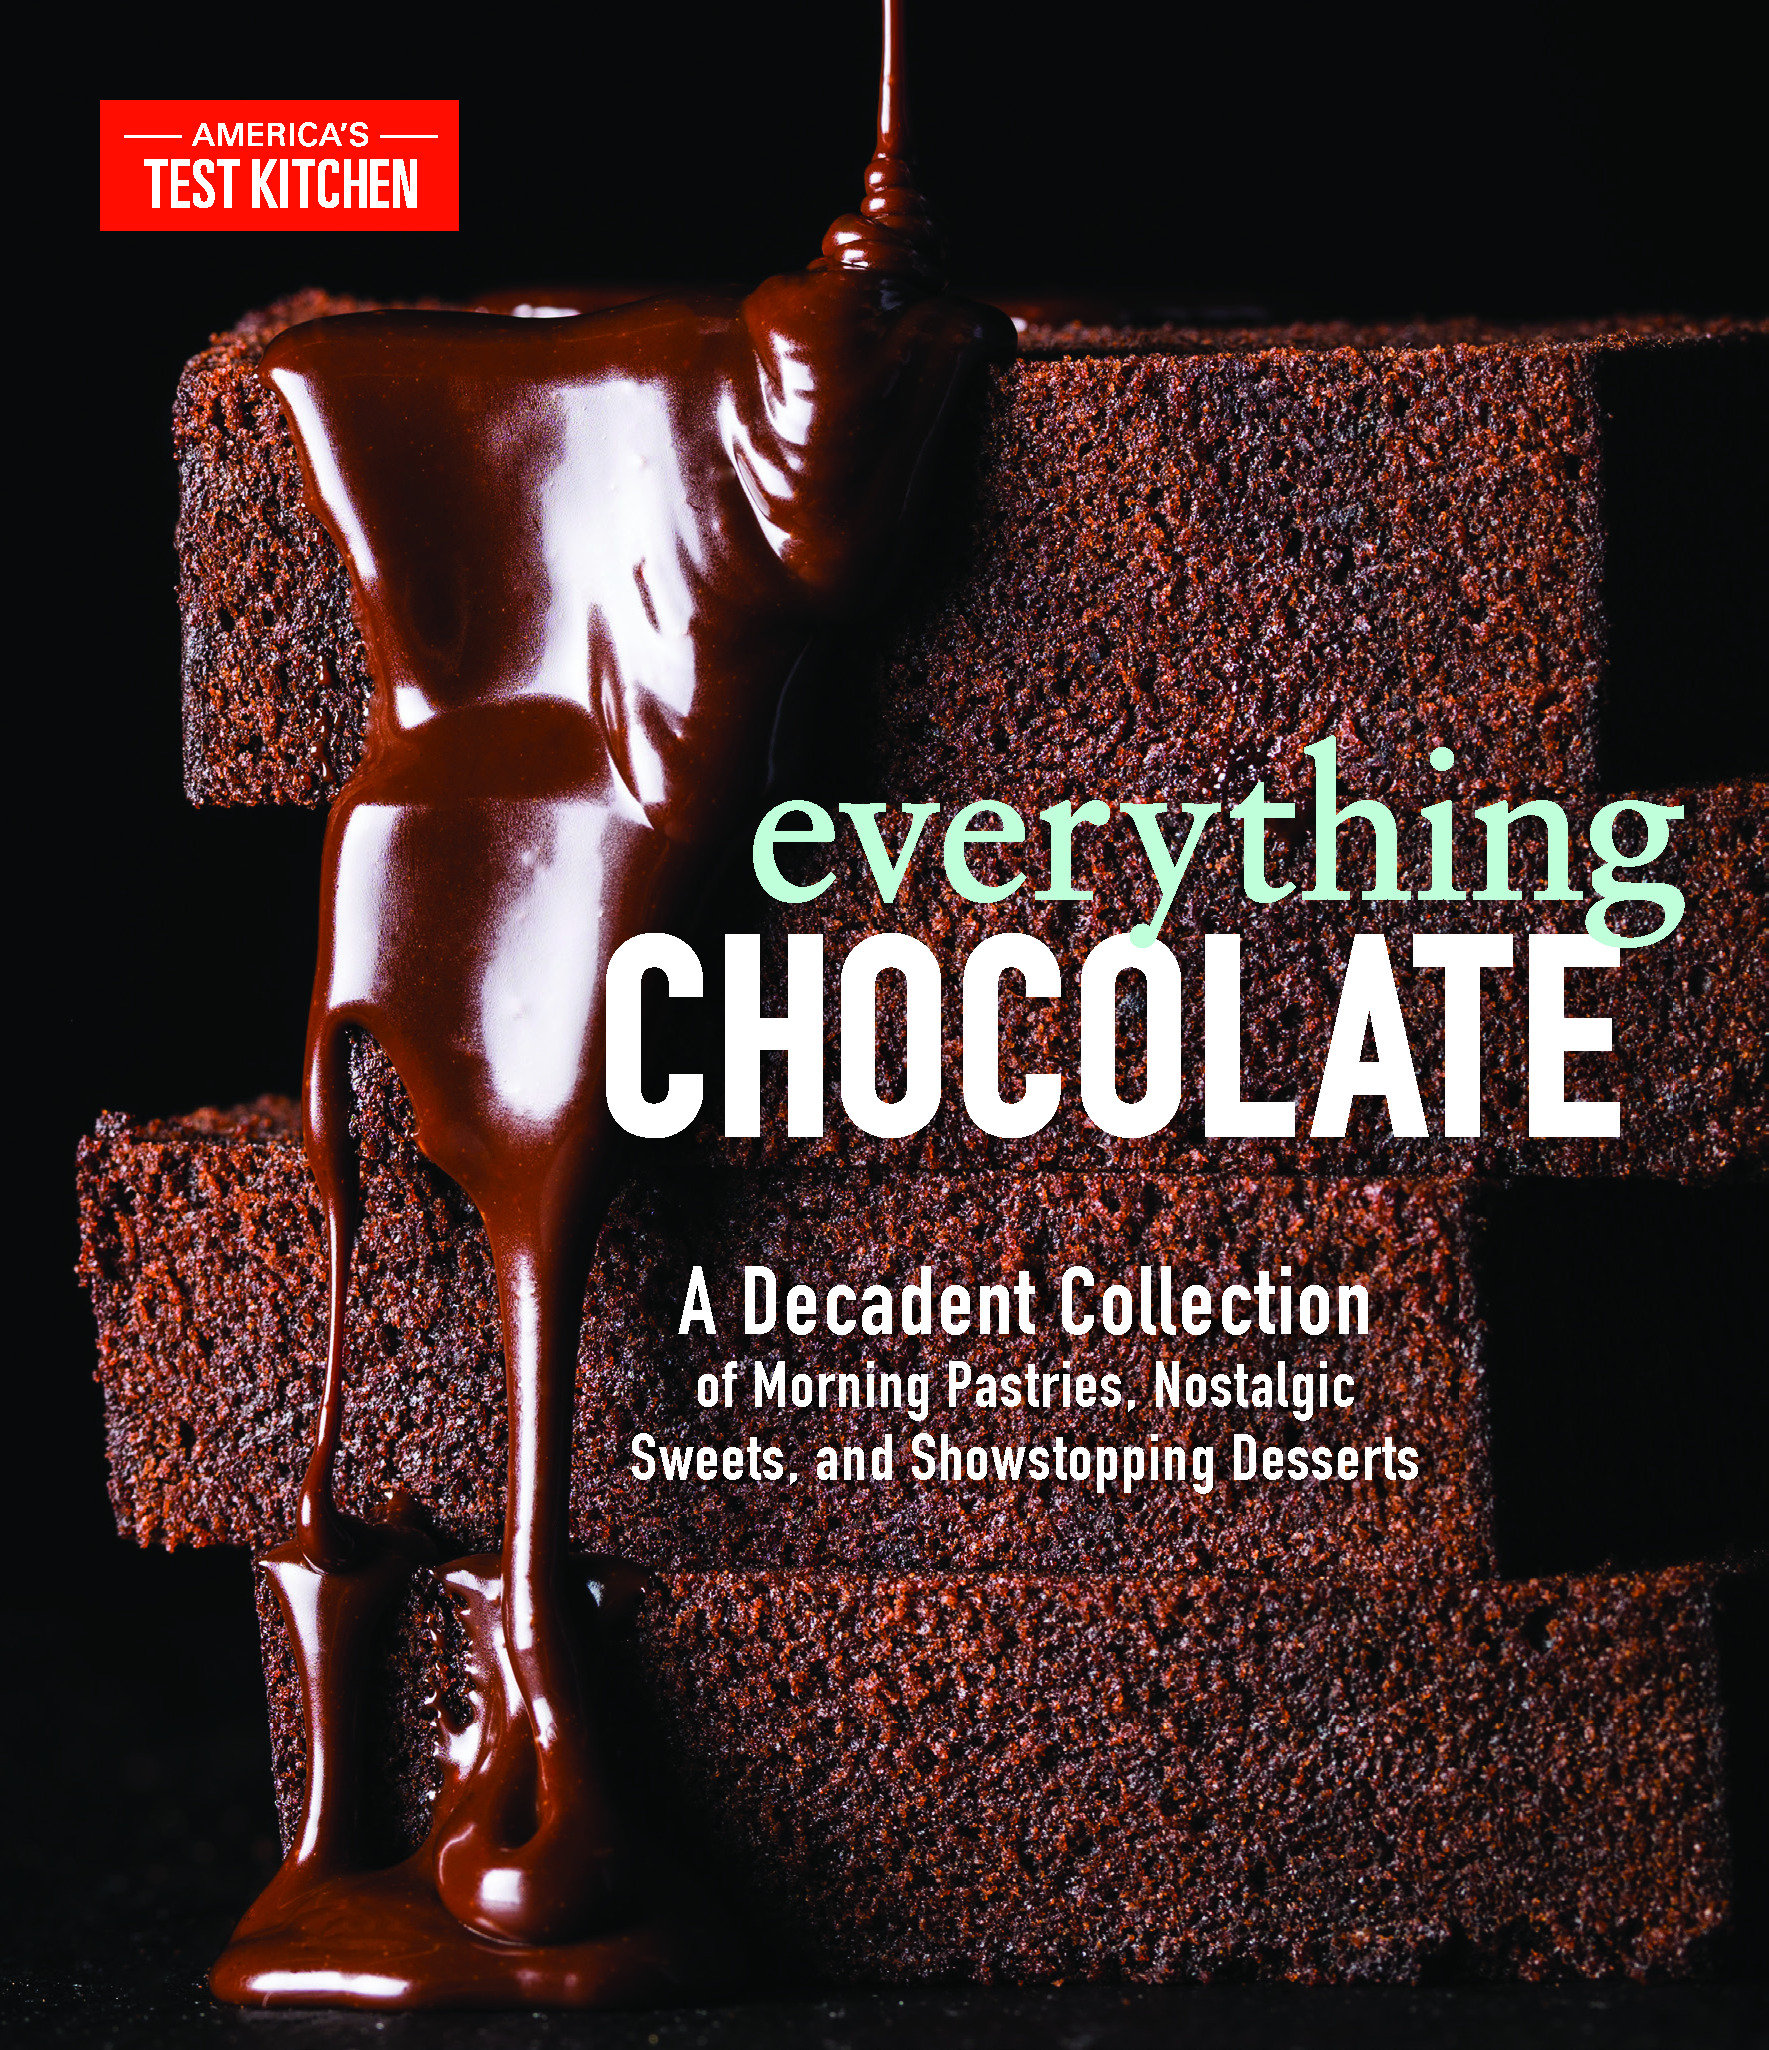 Everything chocolate a decadent collection of morning pastries, nostalgic sweets, and showstopping desserts cover image